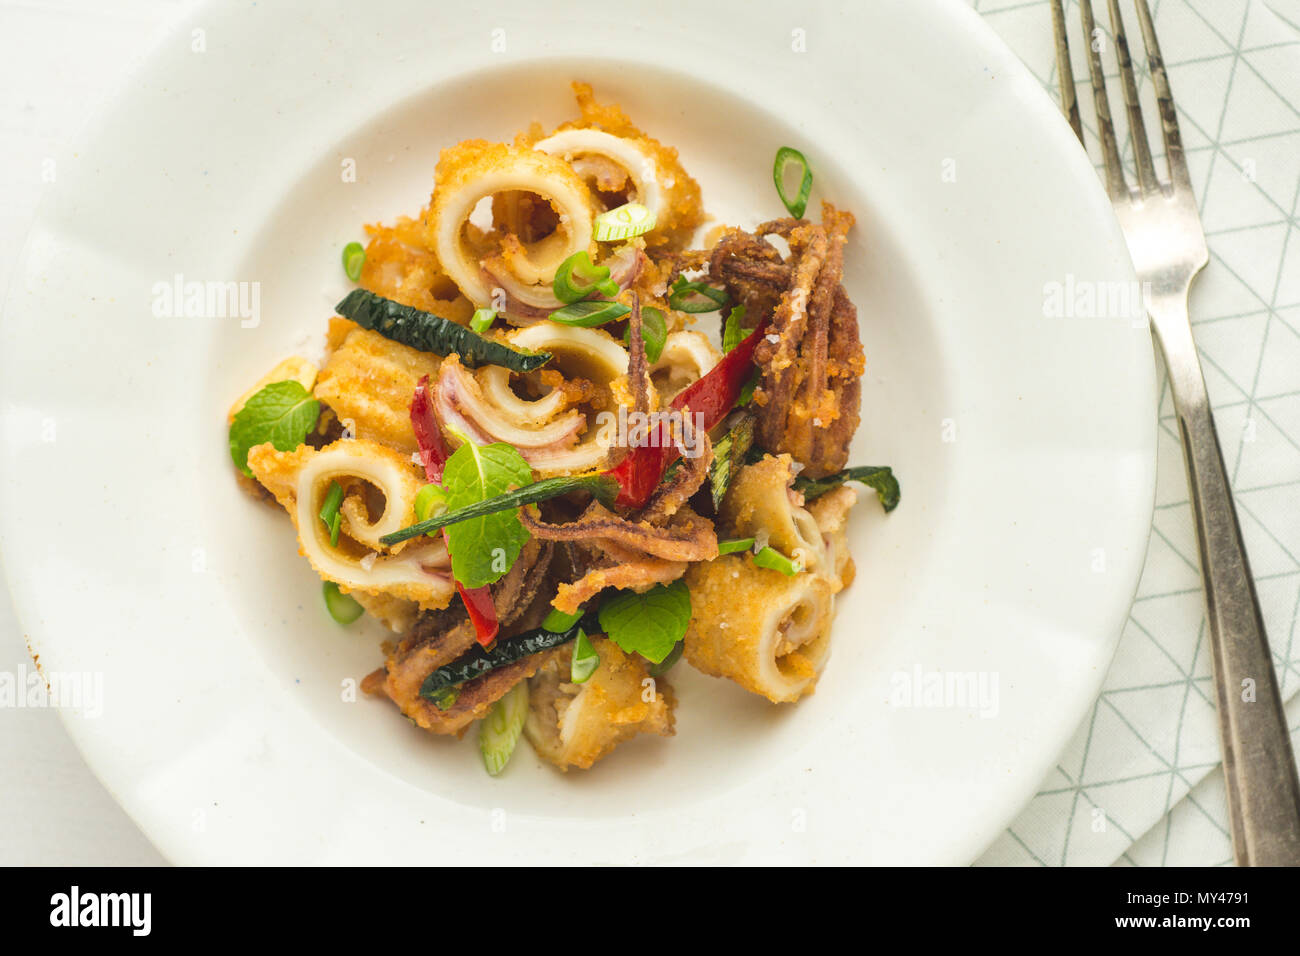 Fried Squids Calamari, Chili Pepper and Mint Leaves on White Plate Stock Photo